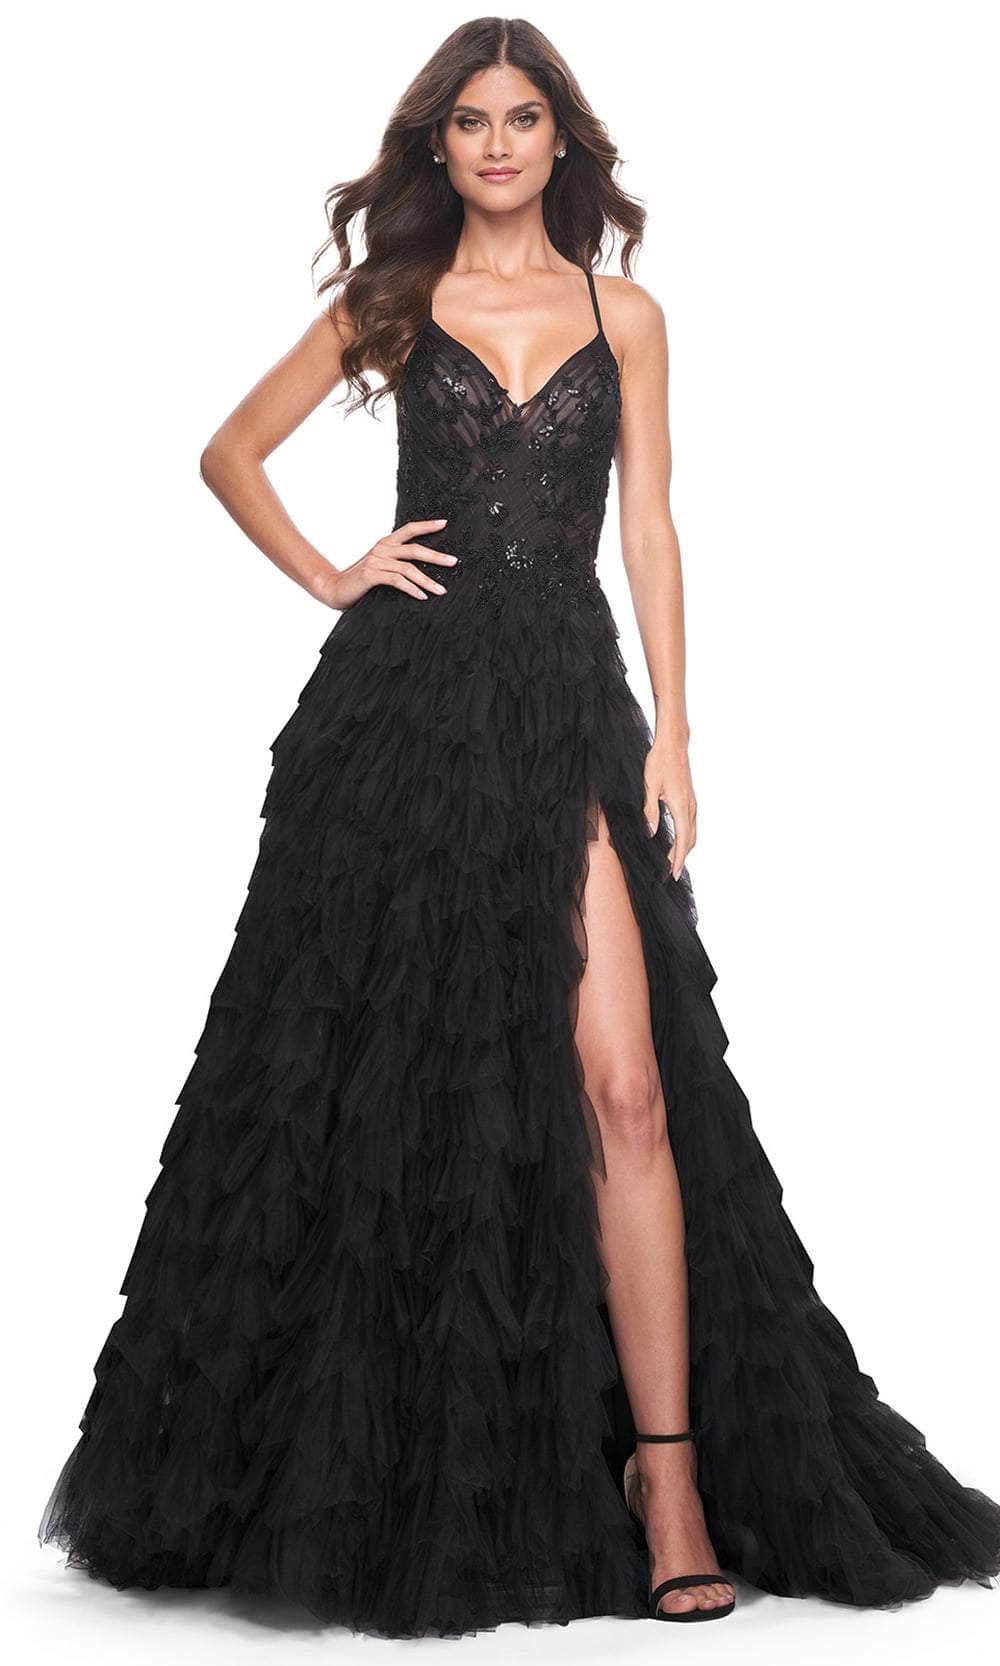 Image of La Femme 32108 - Ruffle Detailed A-Line Prom Gown